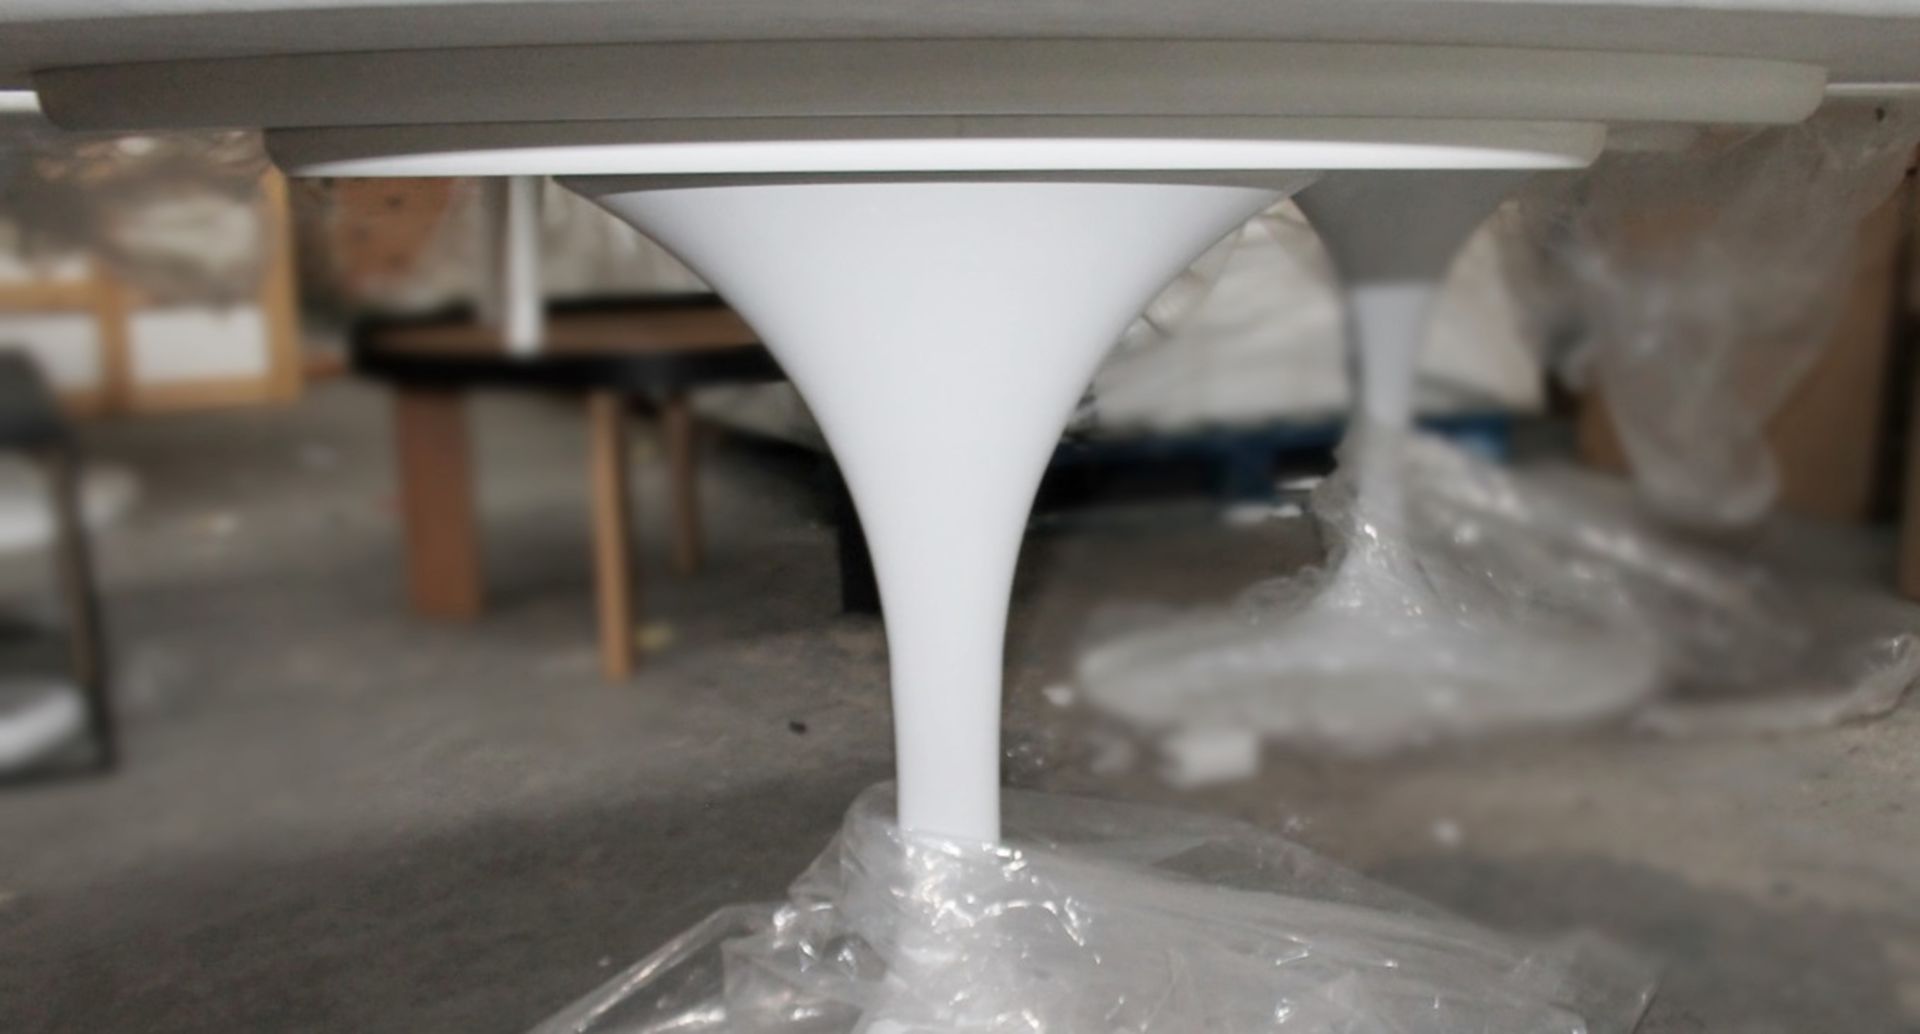 1 x Eero Saarinen Inspired Large Oval Carrara Marble-Topped Dining Table - H74cm x W150 x D120cm - Image 5 of 6